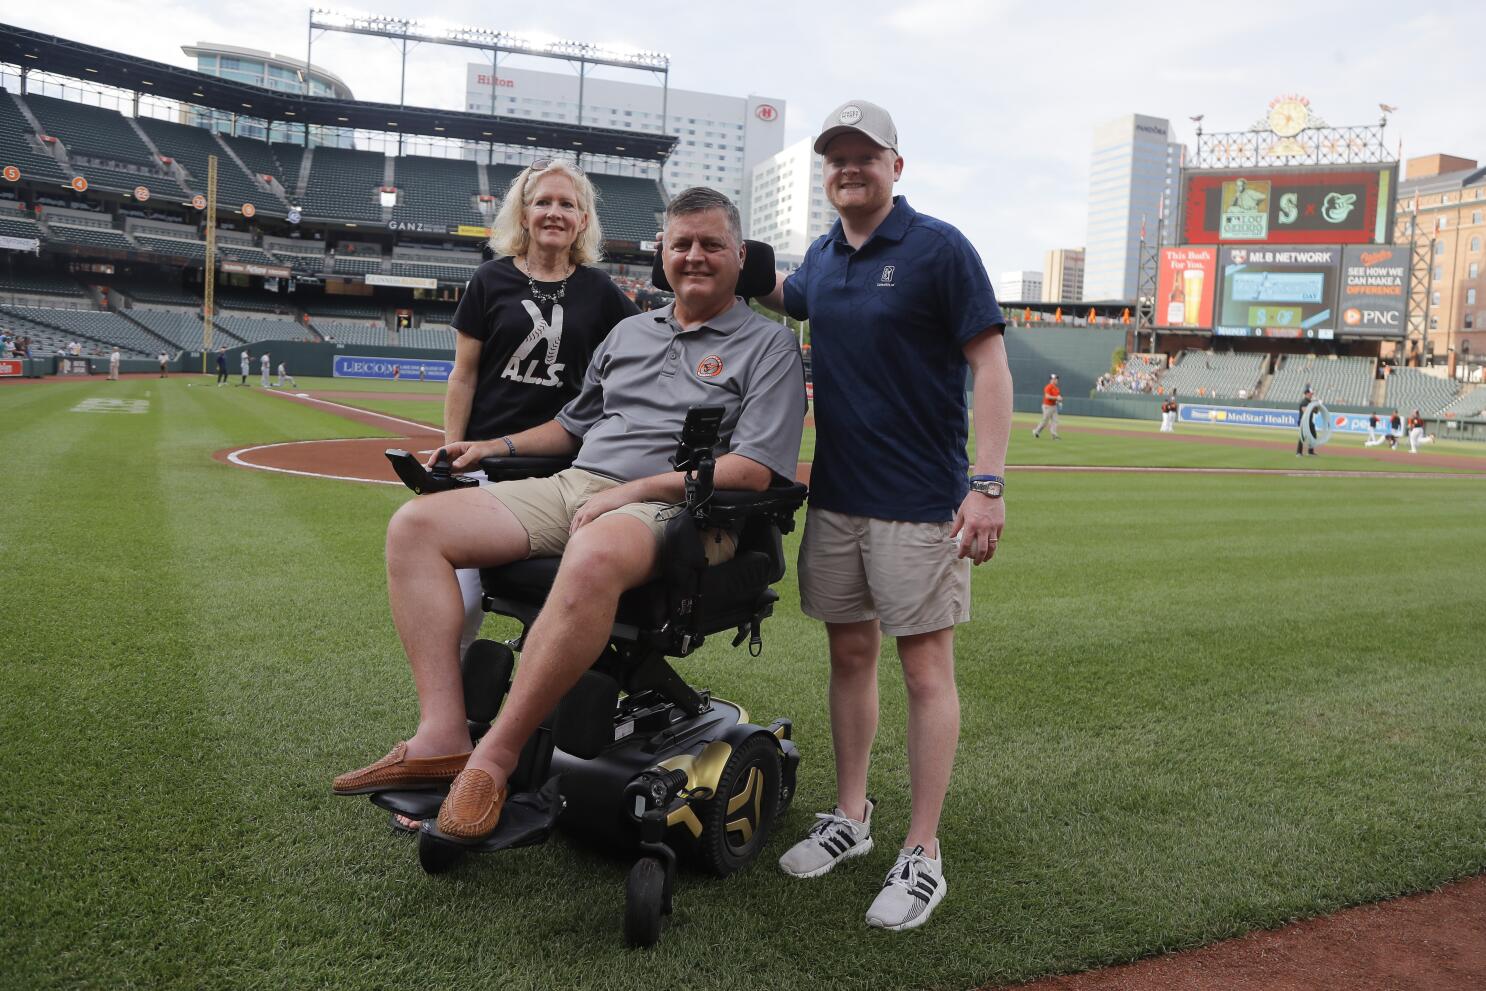 The ALS Community and Major League Baseball Come Together to